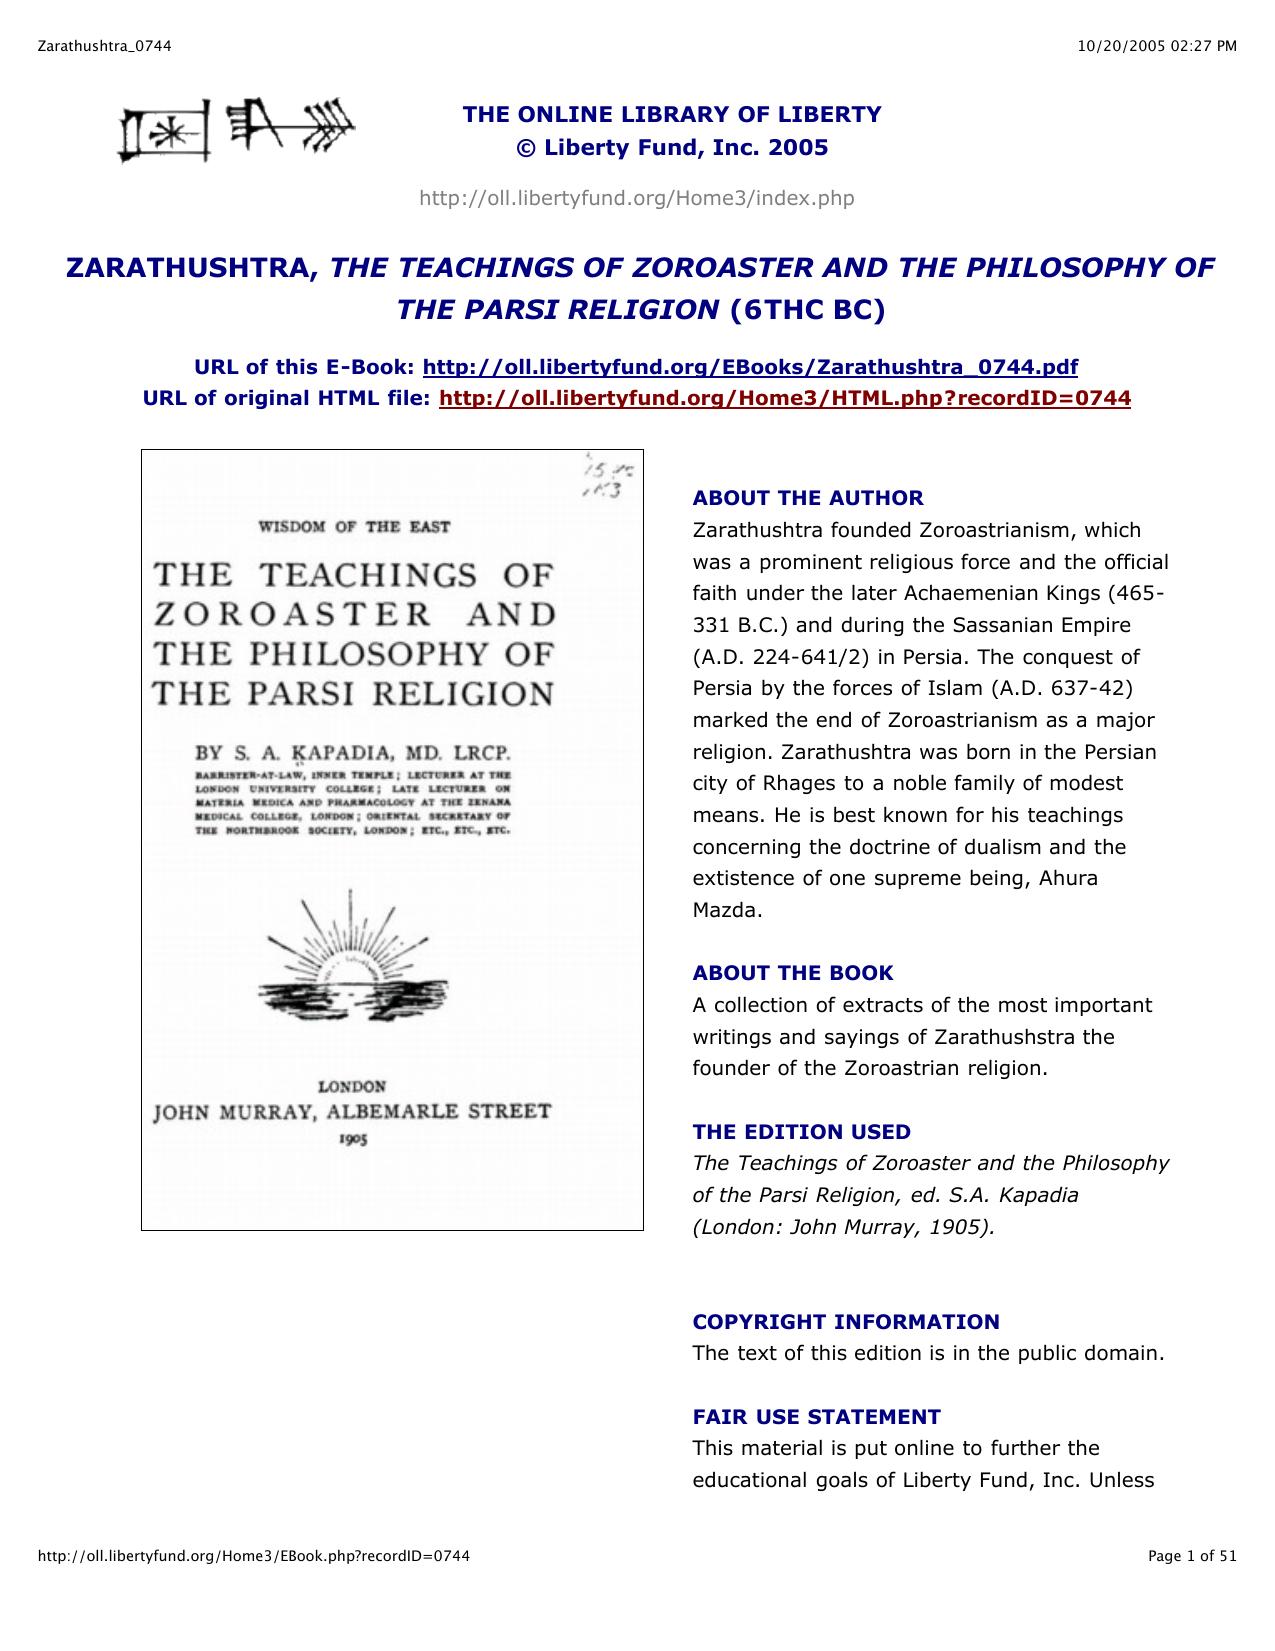 Zarathushtra, The Teachings of Zoroaster and The Philosophy of the Parsi Religion - Essay